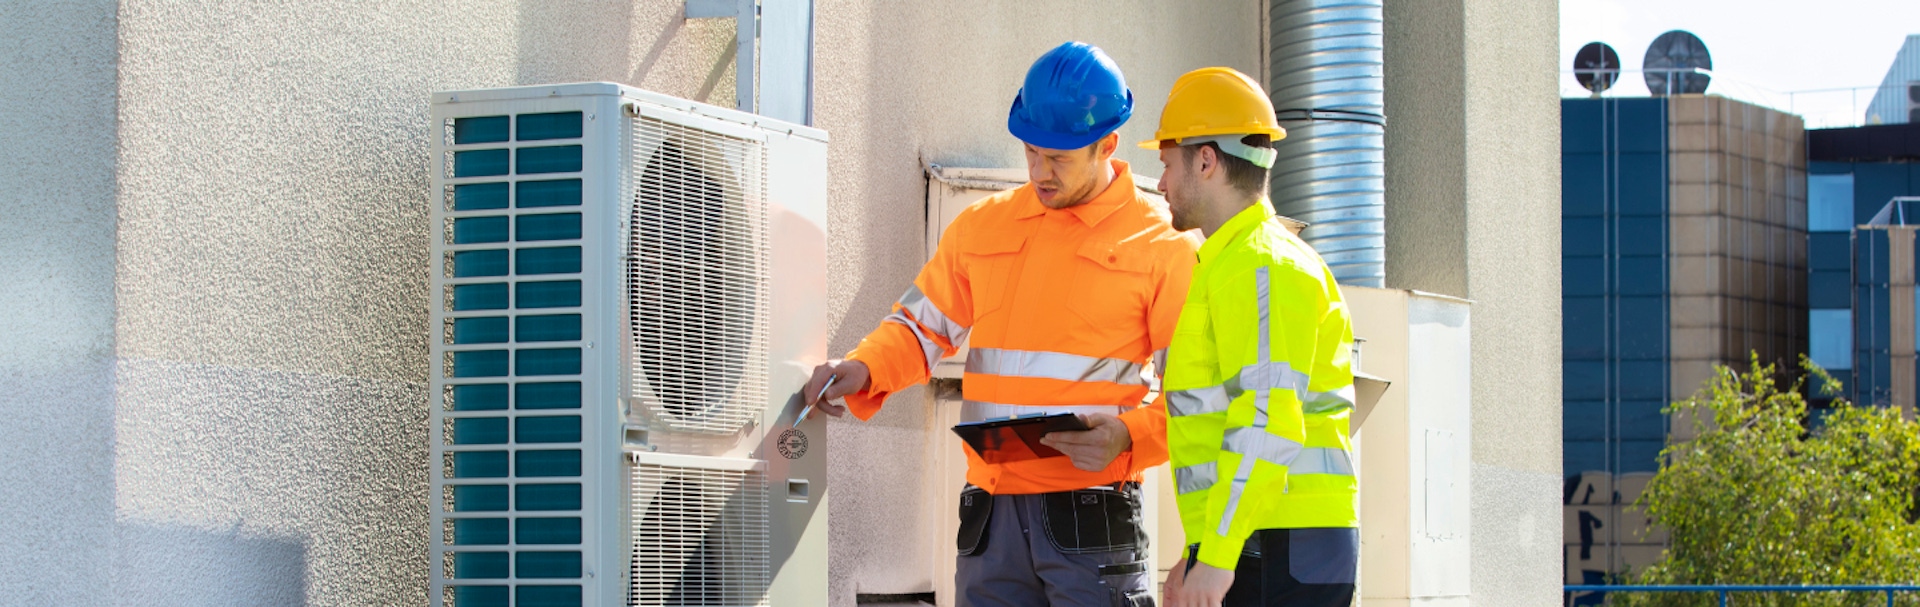 Adobe stock image of air conditioning maintenance work